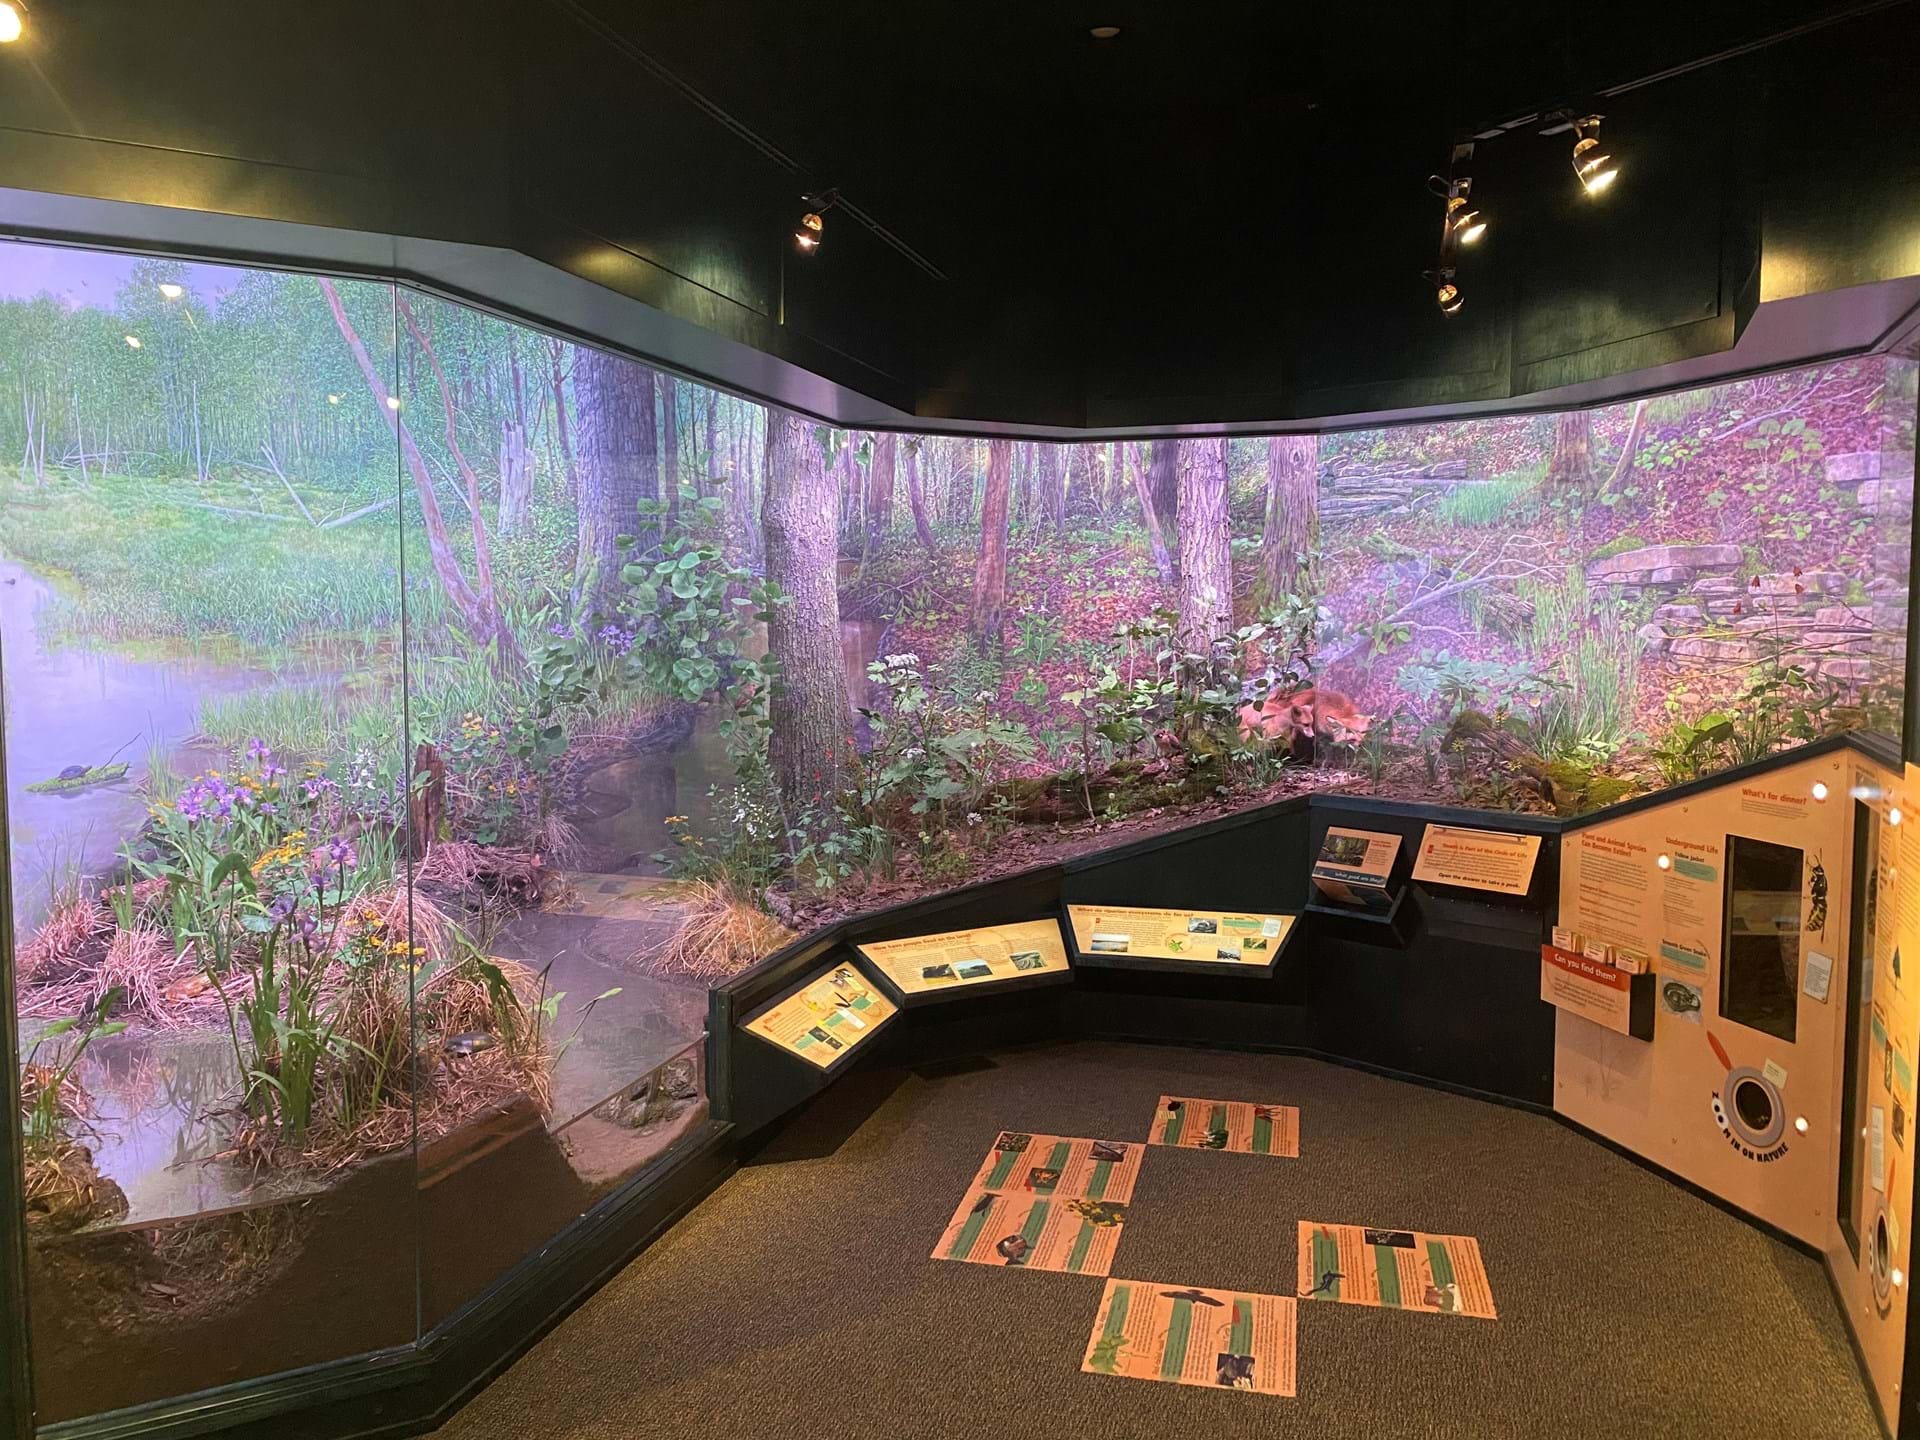 View inside the Nature Center